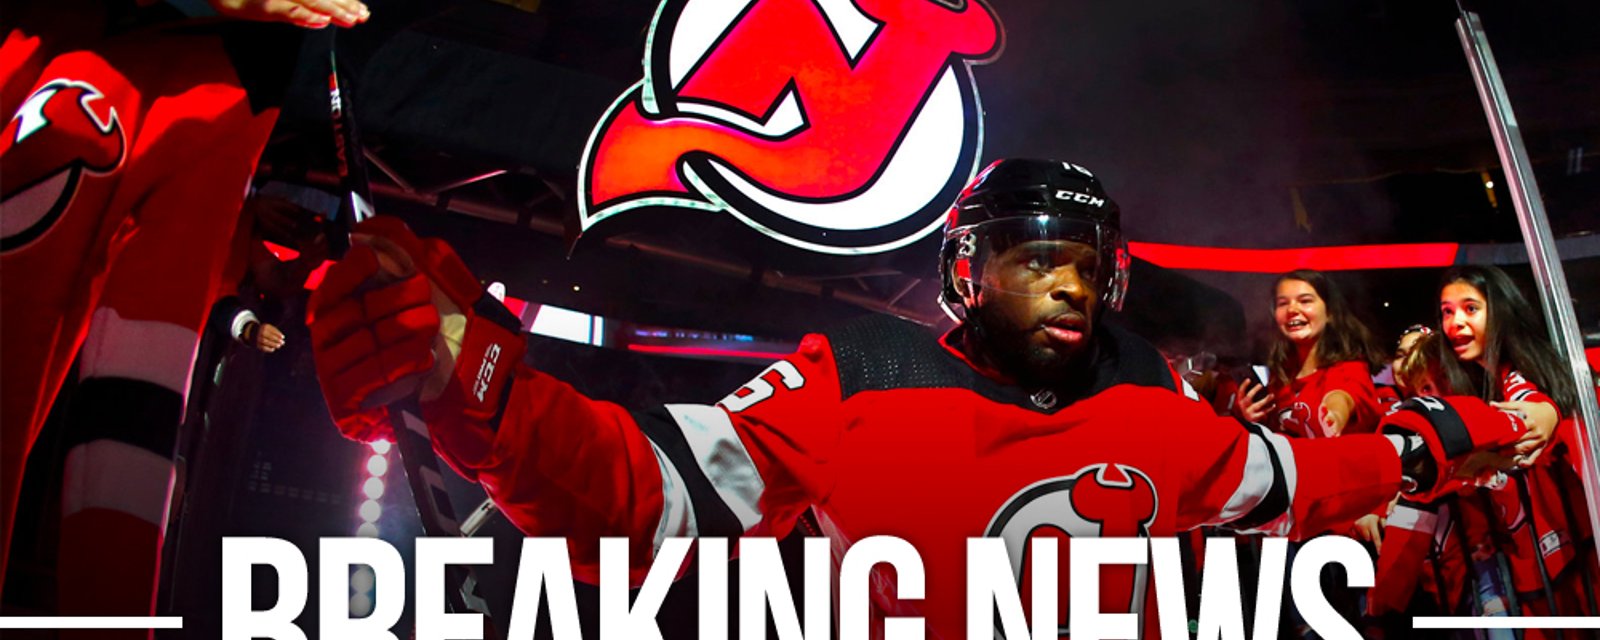 Devils season officially postponed after 10 players put in protocol 